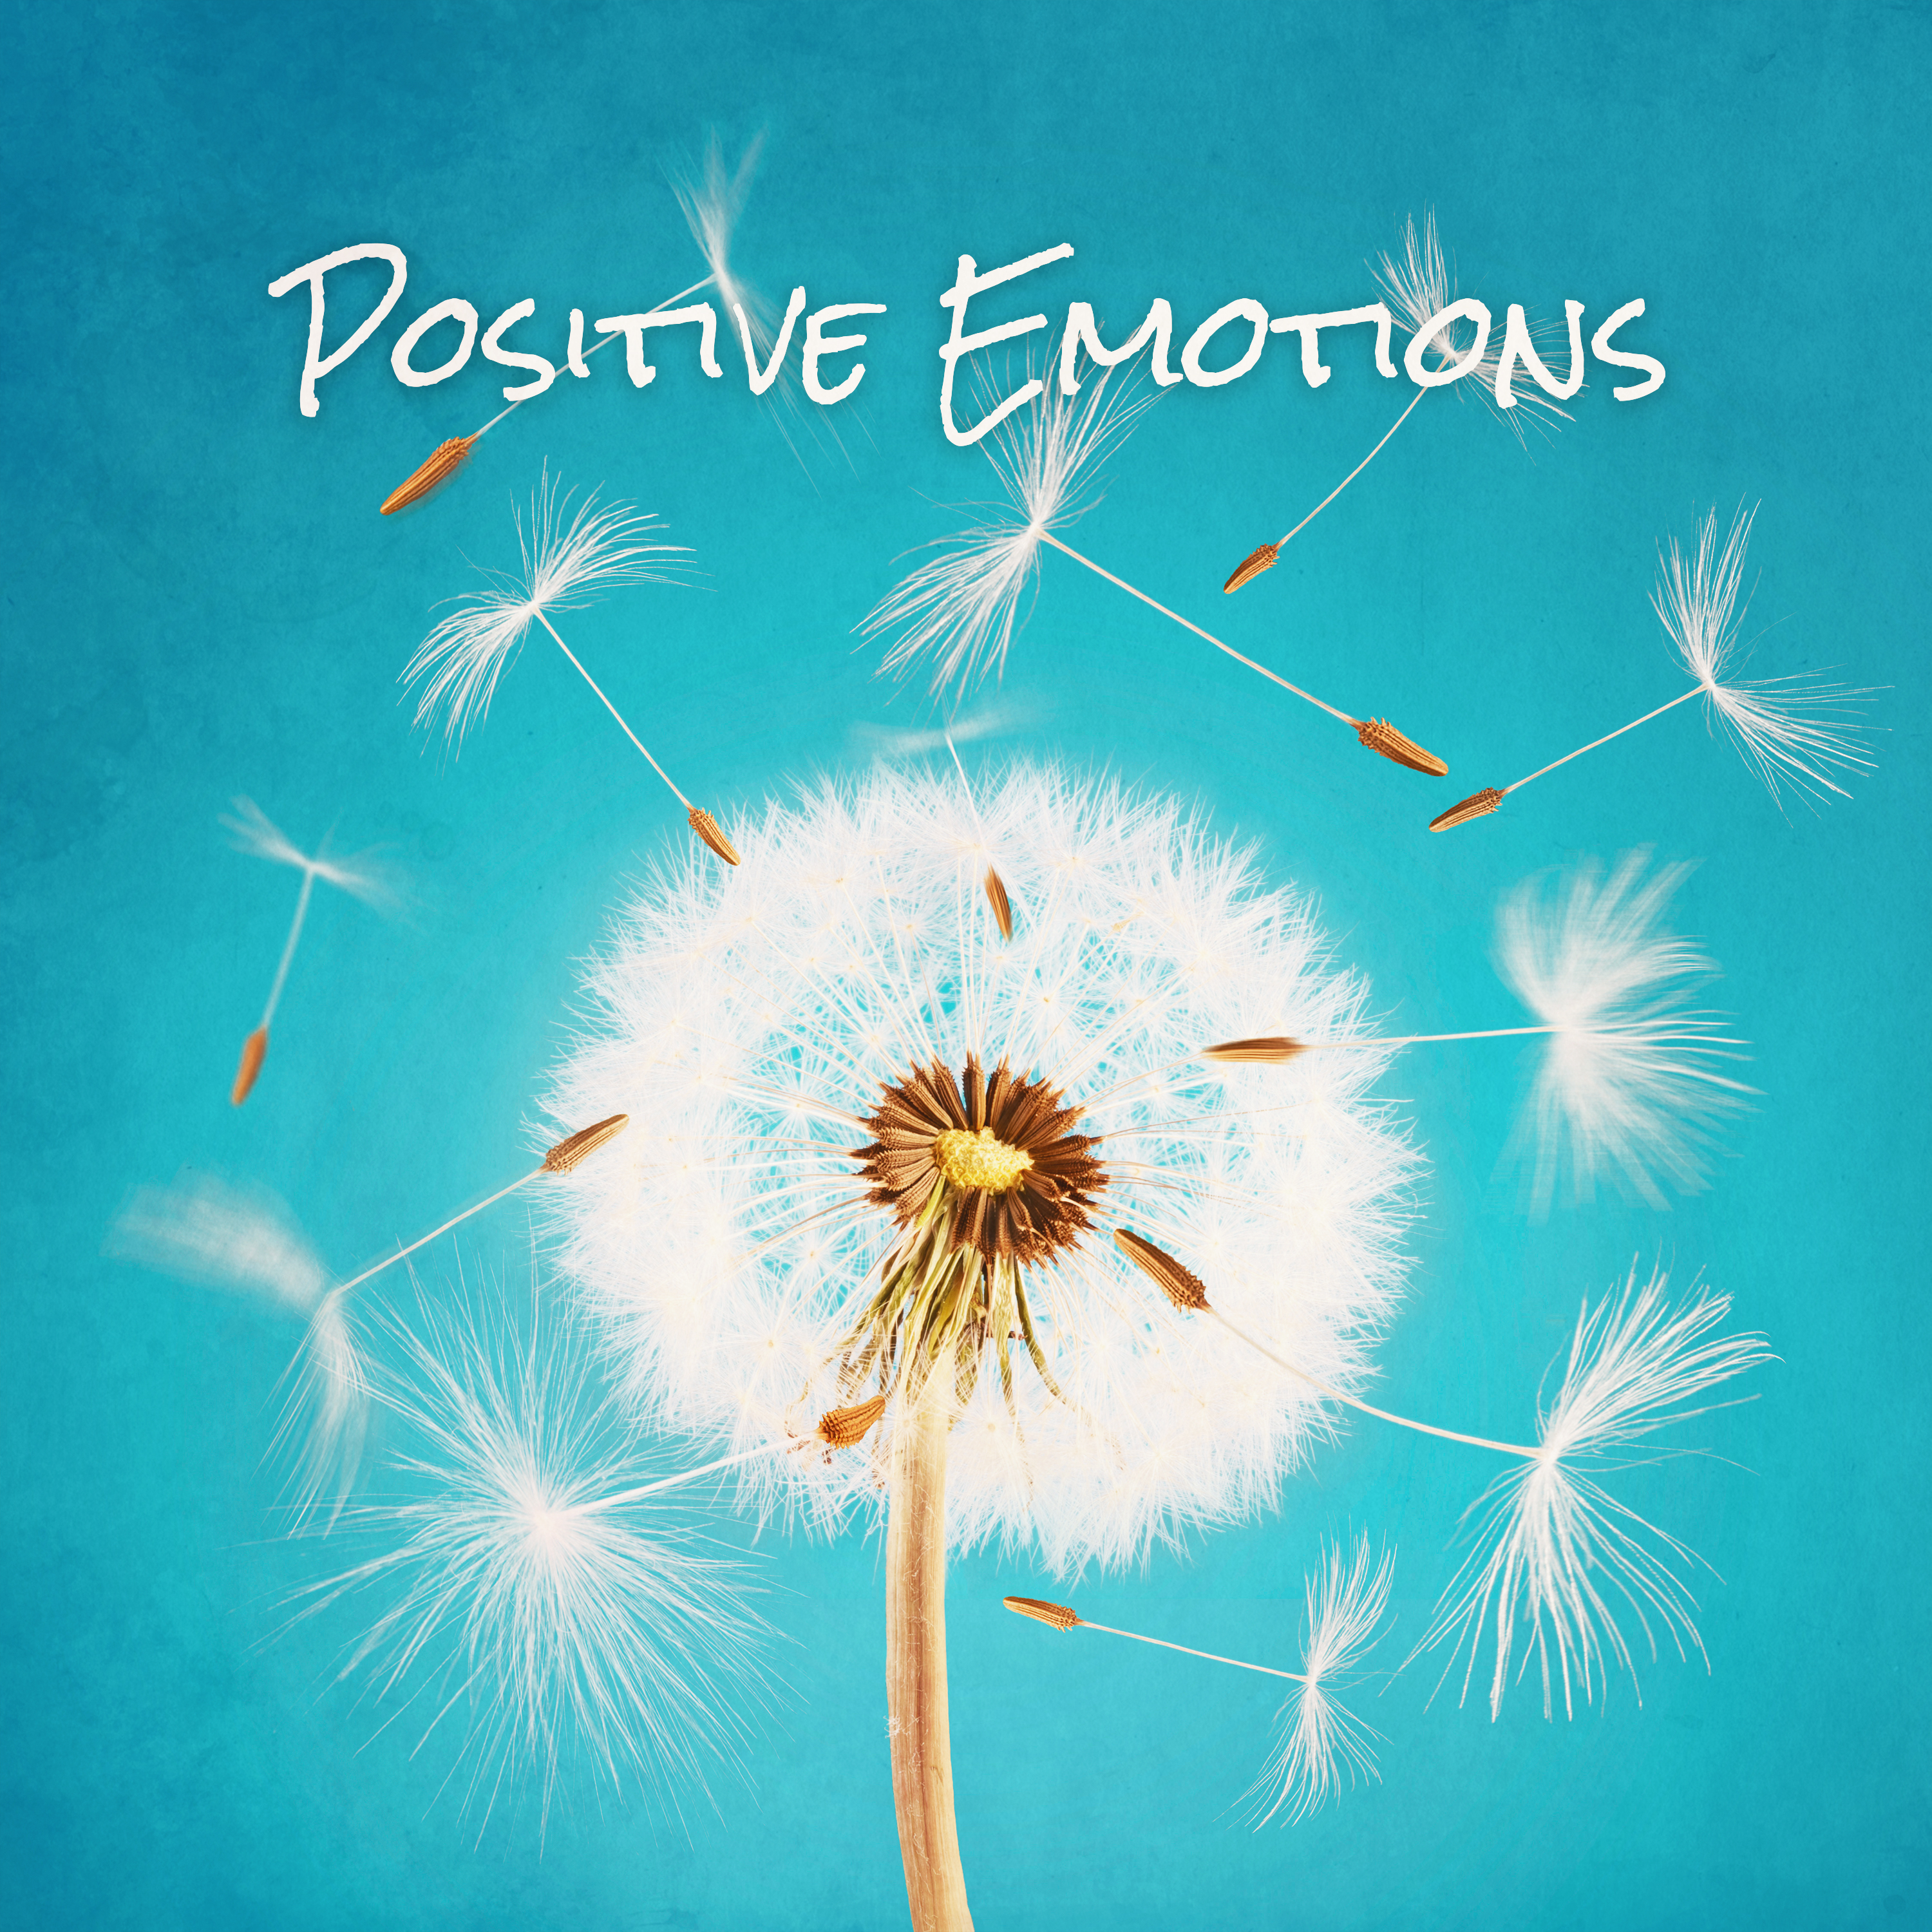 Positive Emotions (Relaxation Music, Stress Relief, Spa & Wellness, Brain Waves, Body Balance, Free Your Soul & Mind, Inspiration)